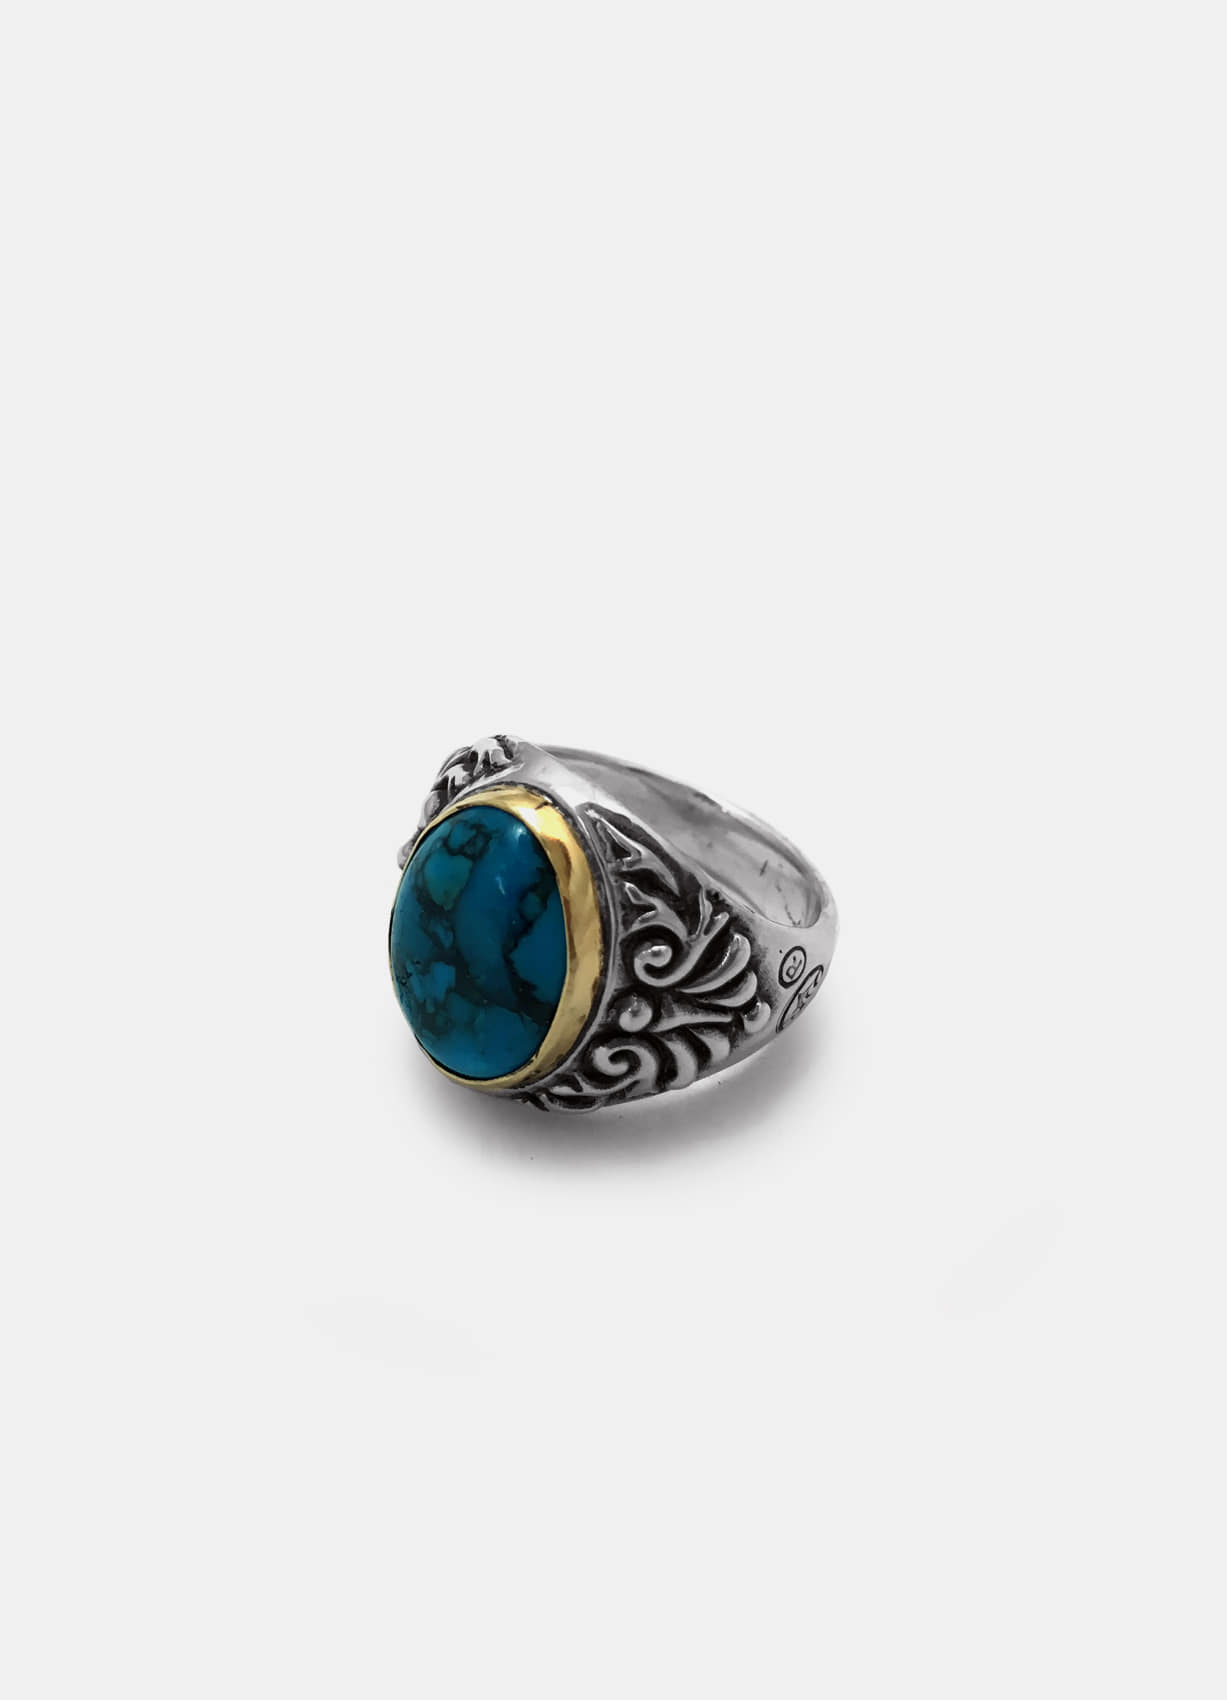 Turquoise Cabochon Ring Brass Band